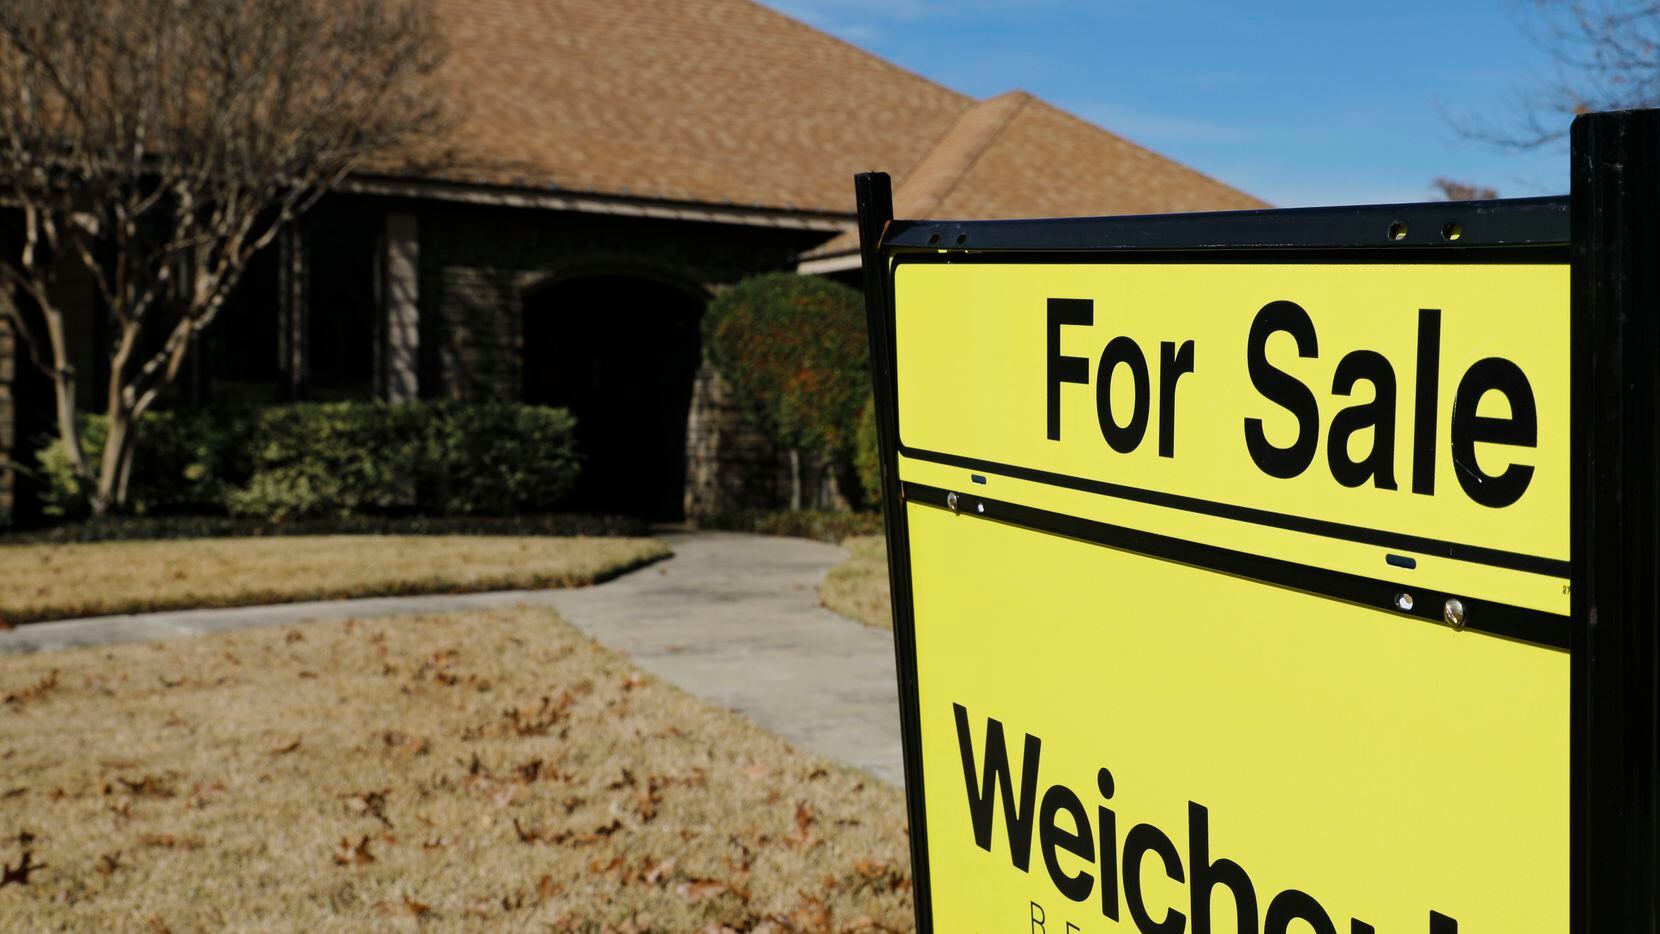 Dallas-area home prices were up 3% from a year ago in the latest S&P/Case-Shiller home price...